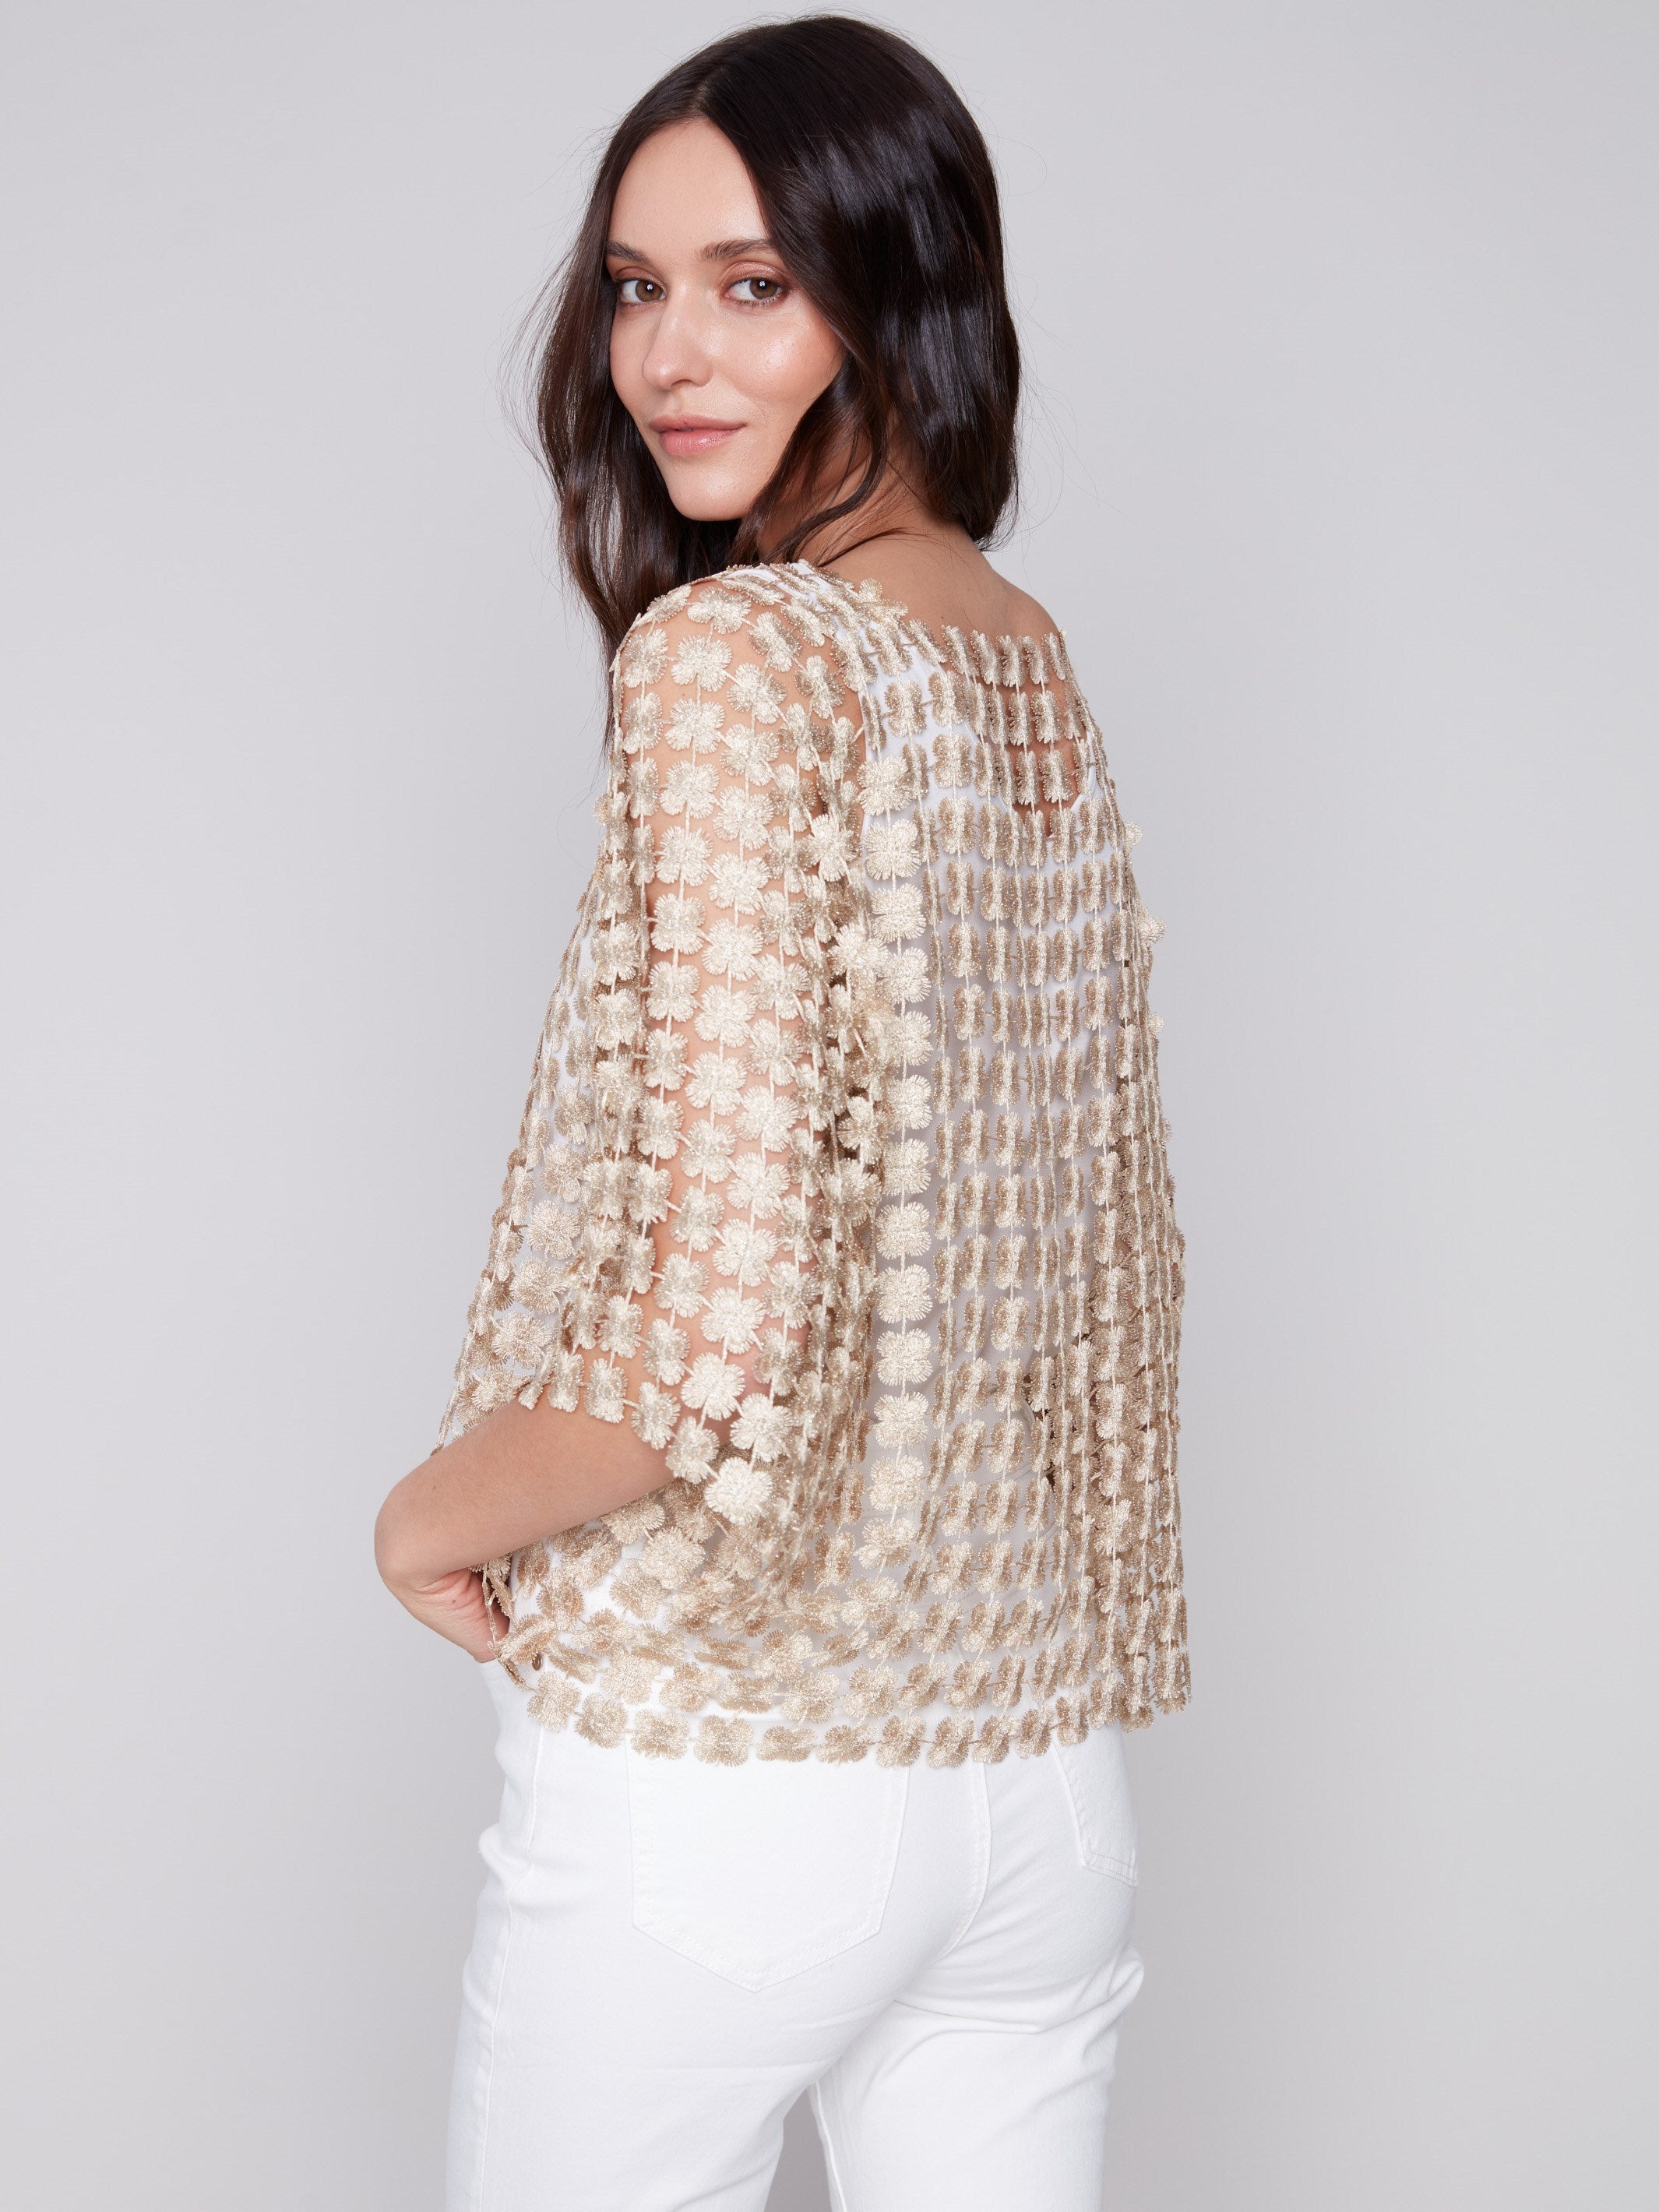 Textured Crochet Flower Top - Gold - Charlie B Collection Canada - Image 2